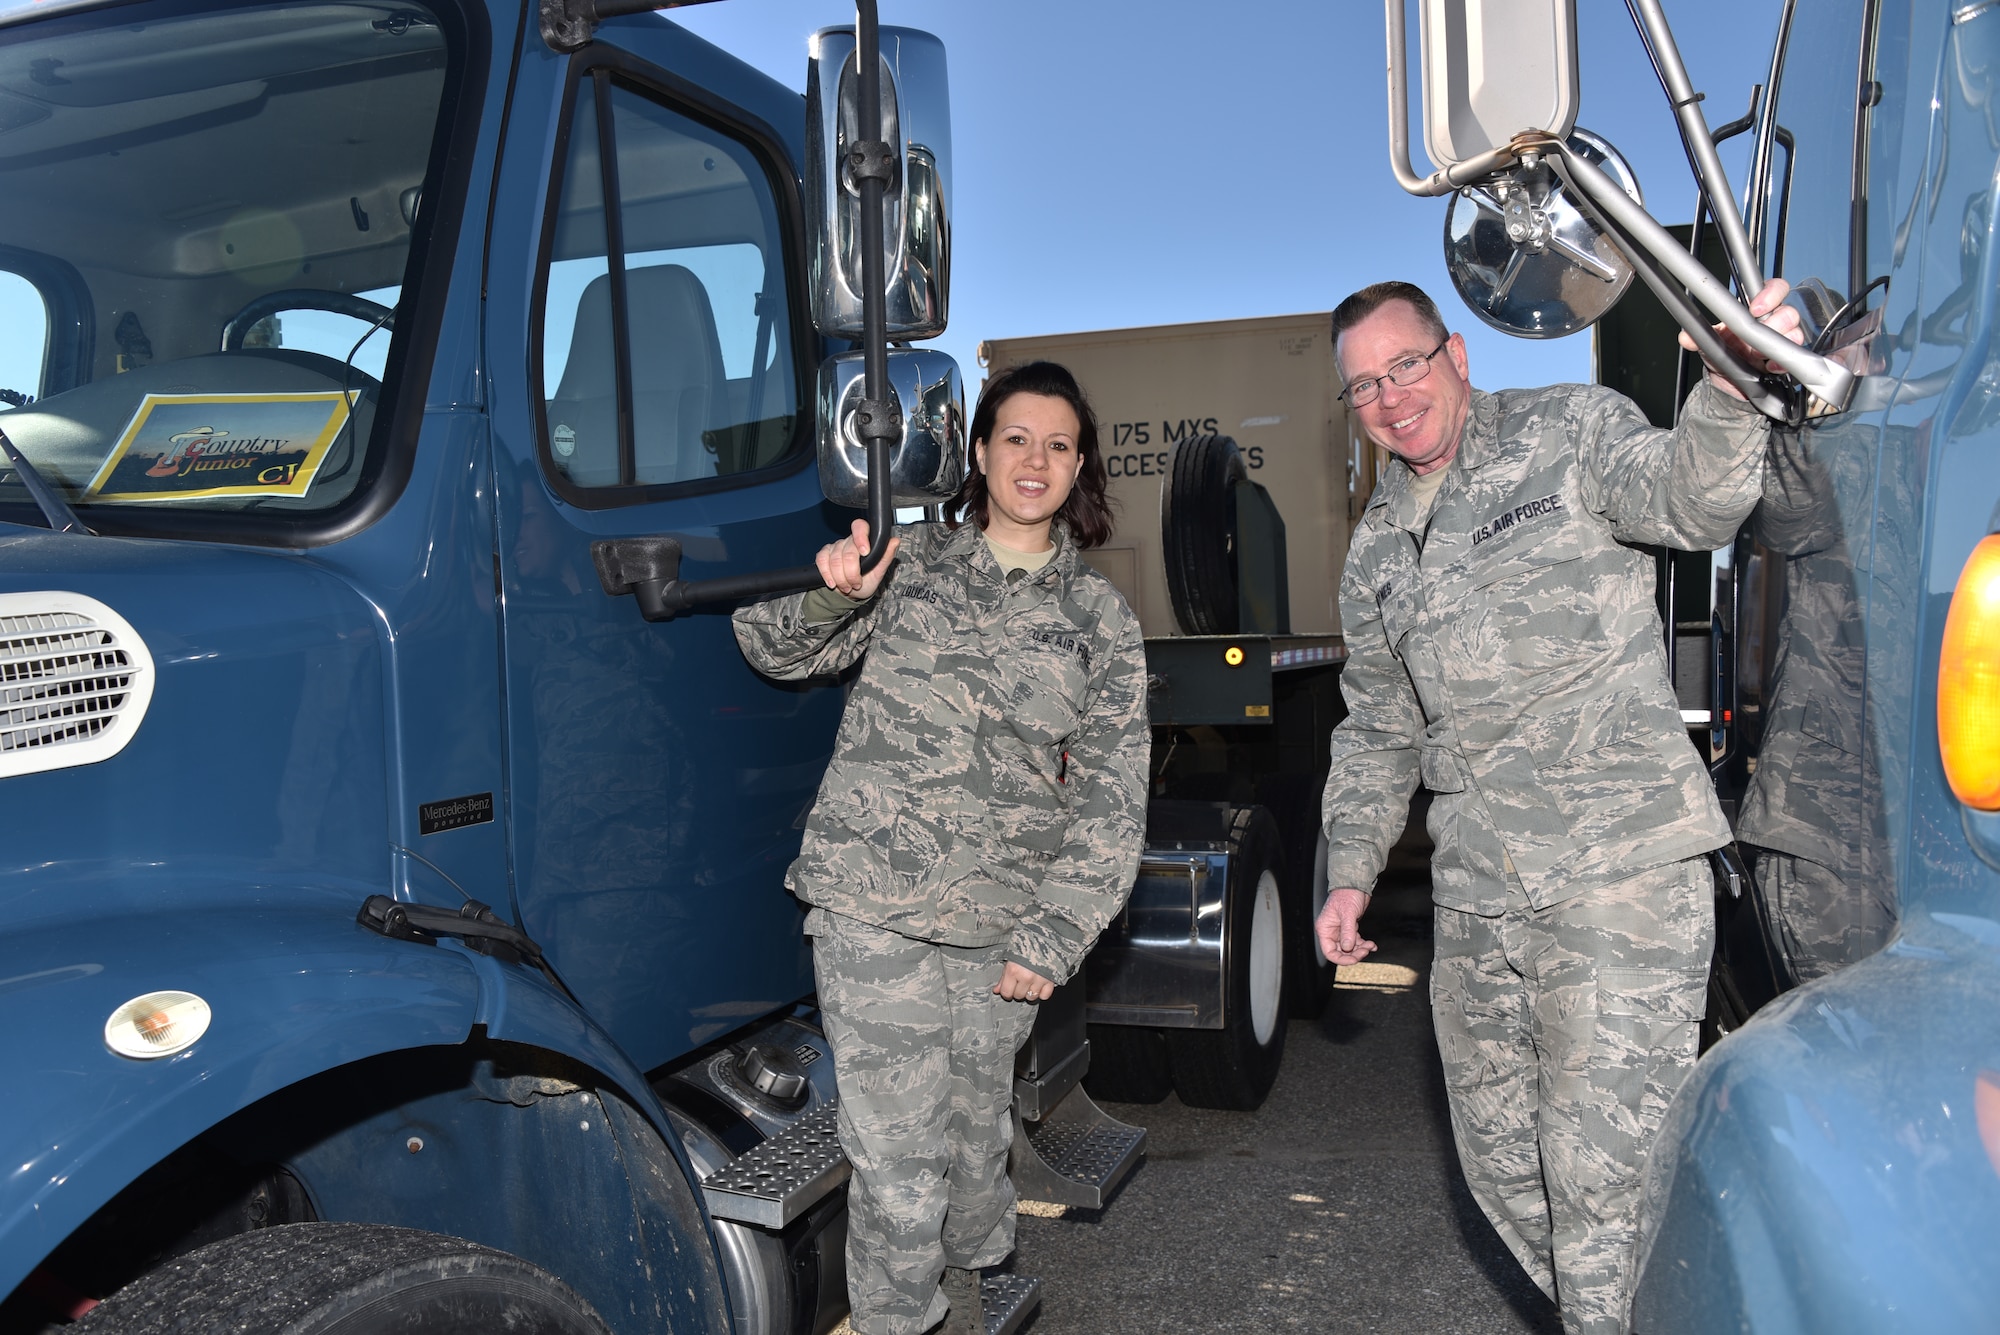 Tech Sgt. Nicole Loucas, Asst. Non Commissioned Officer in charge, Tech Sgt. Bobby Hynes, Non Commissioned Officer in charge are Vehicle Operators with the Maryland Air National Guard. They pose for a photo atop their big rigs as they prepare to send eight vehicles carrying 17 guard members and nearly $15 million in equipment on a 4,680 mile, round-trip from Warfield Air National Guard Base in Baltimore to Tucson, setting the record for a state-side convoy among any active duty or reserve units in the U.S. Air Force. (U.S. Air National Guard photo by Senior Master Sgt. Ed Bard/RELEASED) 